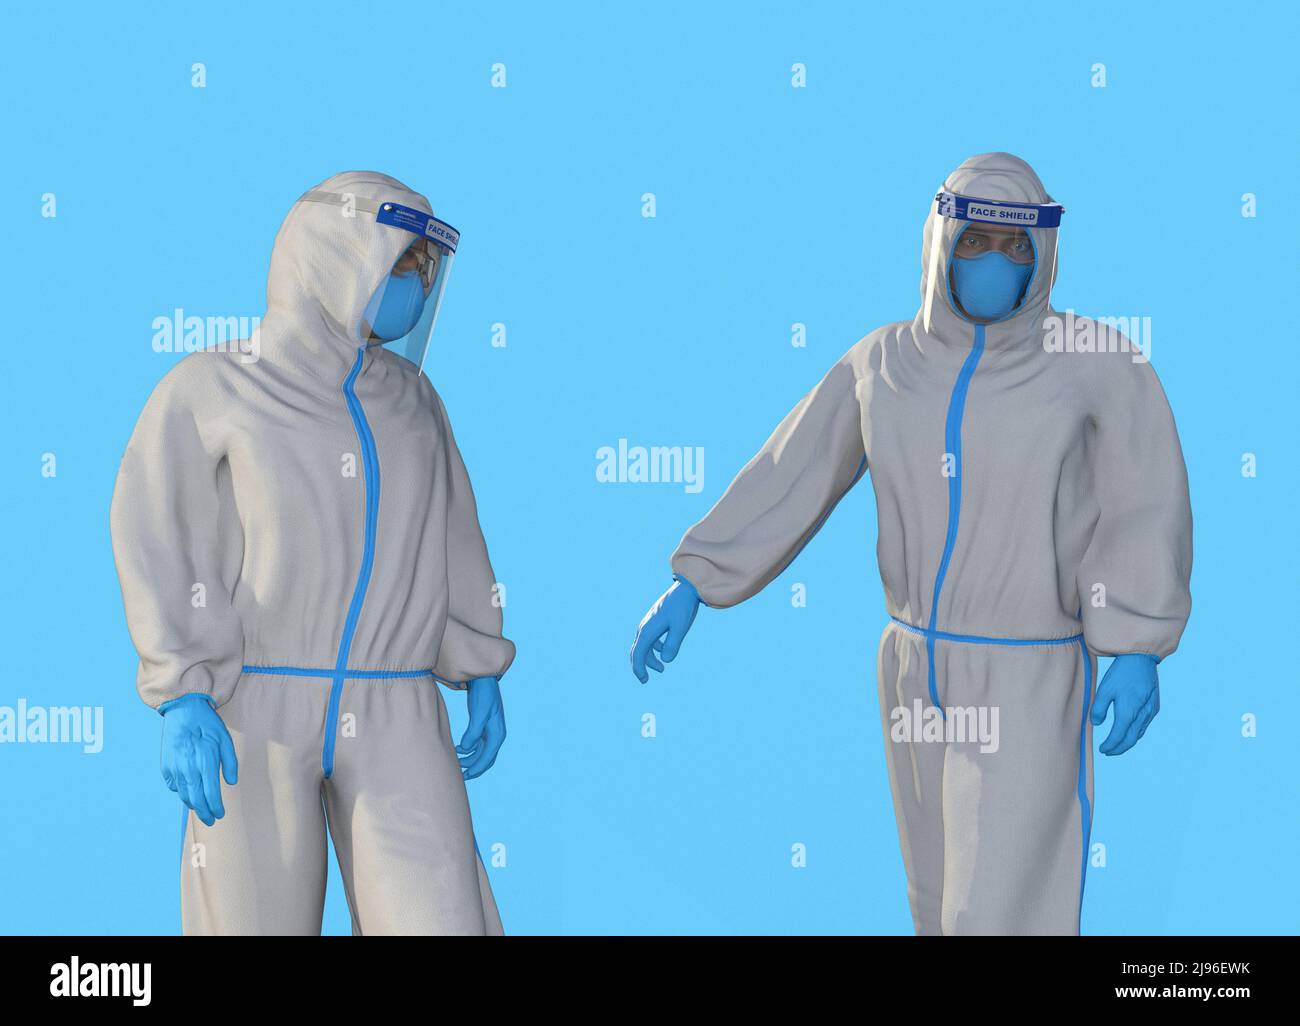 Healthcare workers wearing protective clothing, illustration Stock Photo